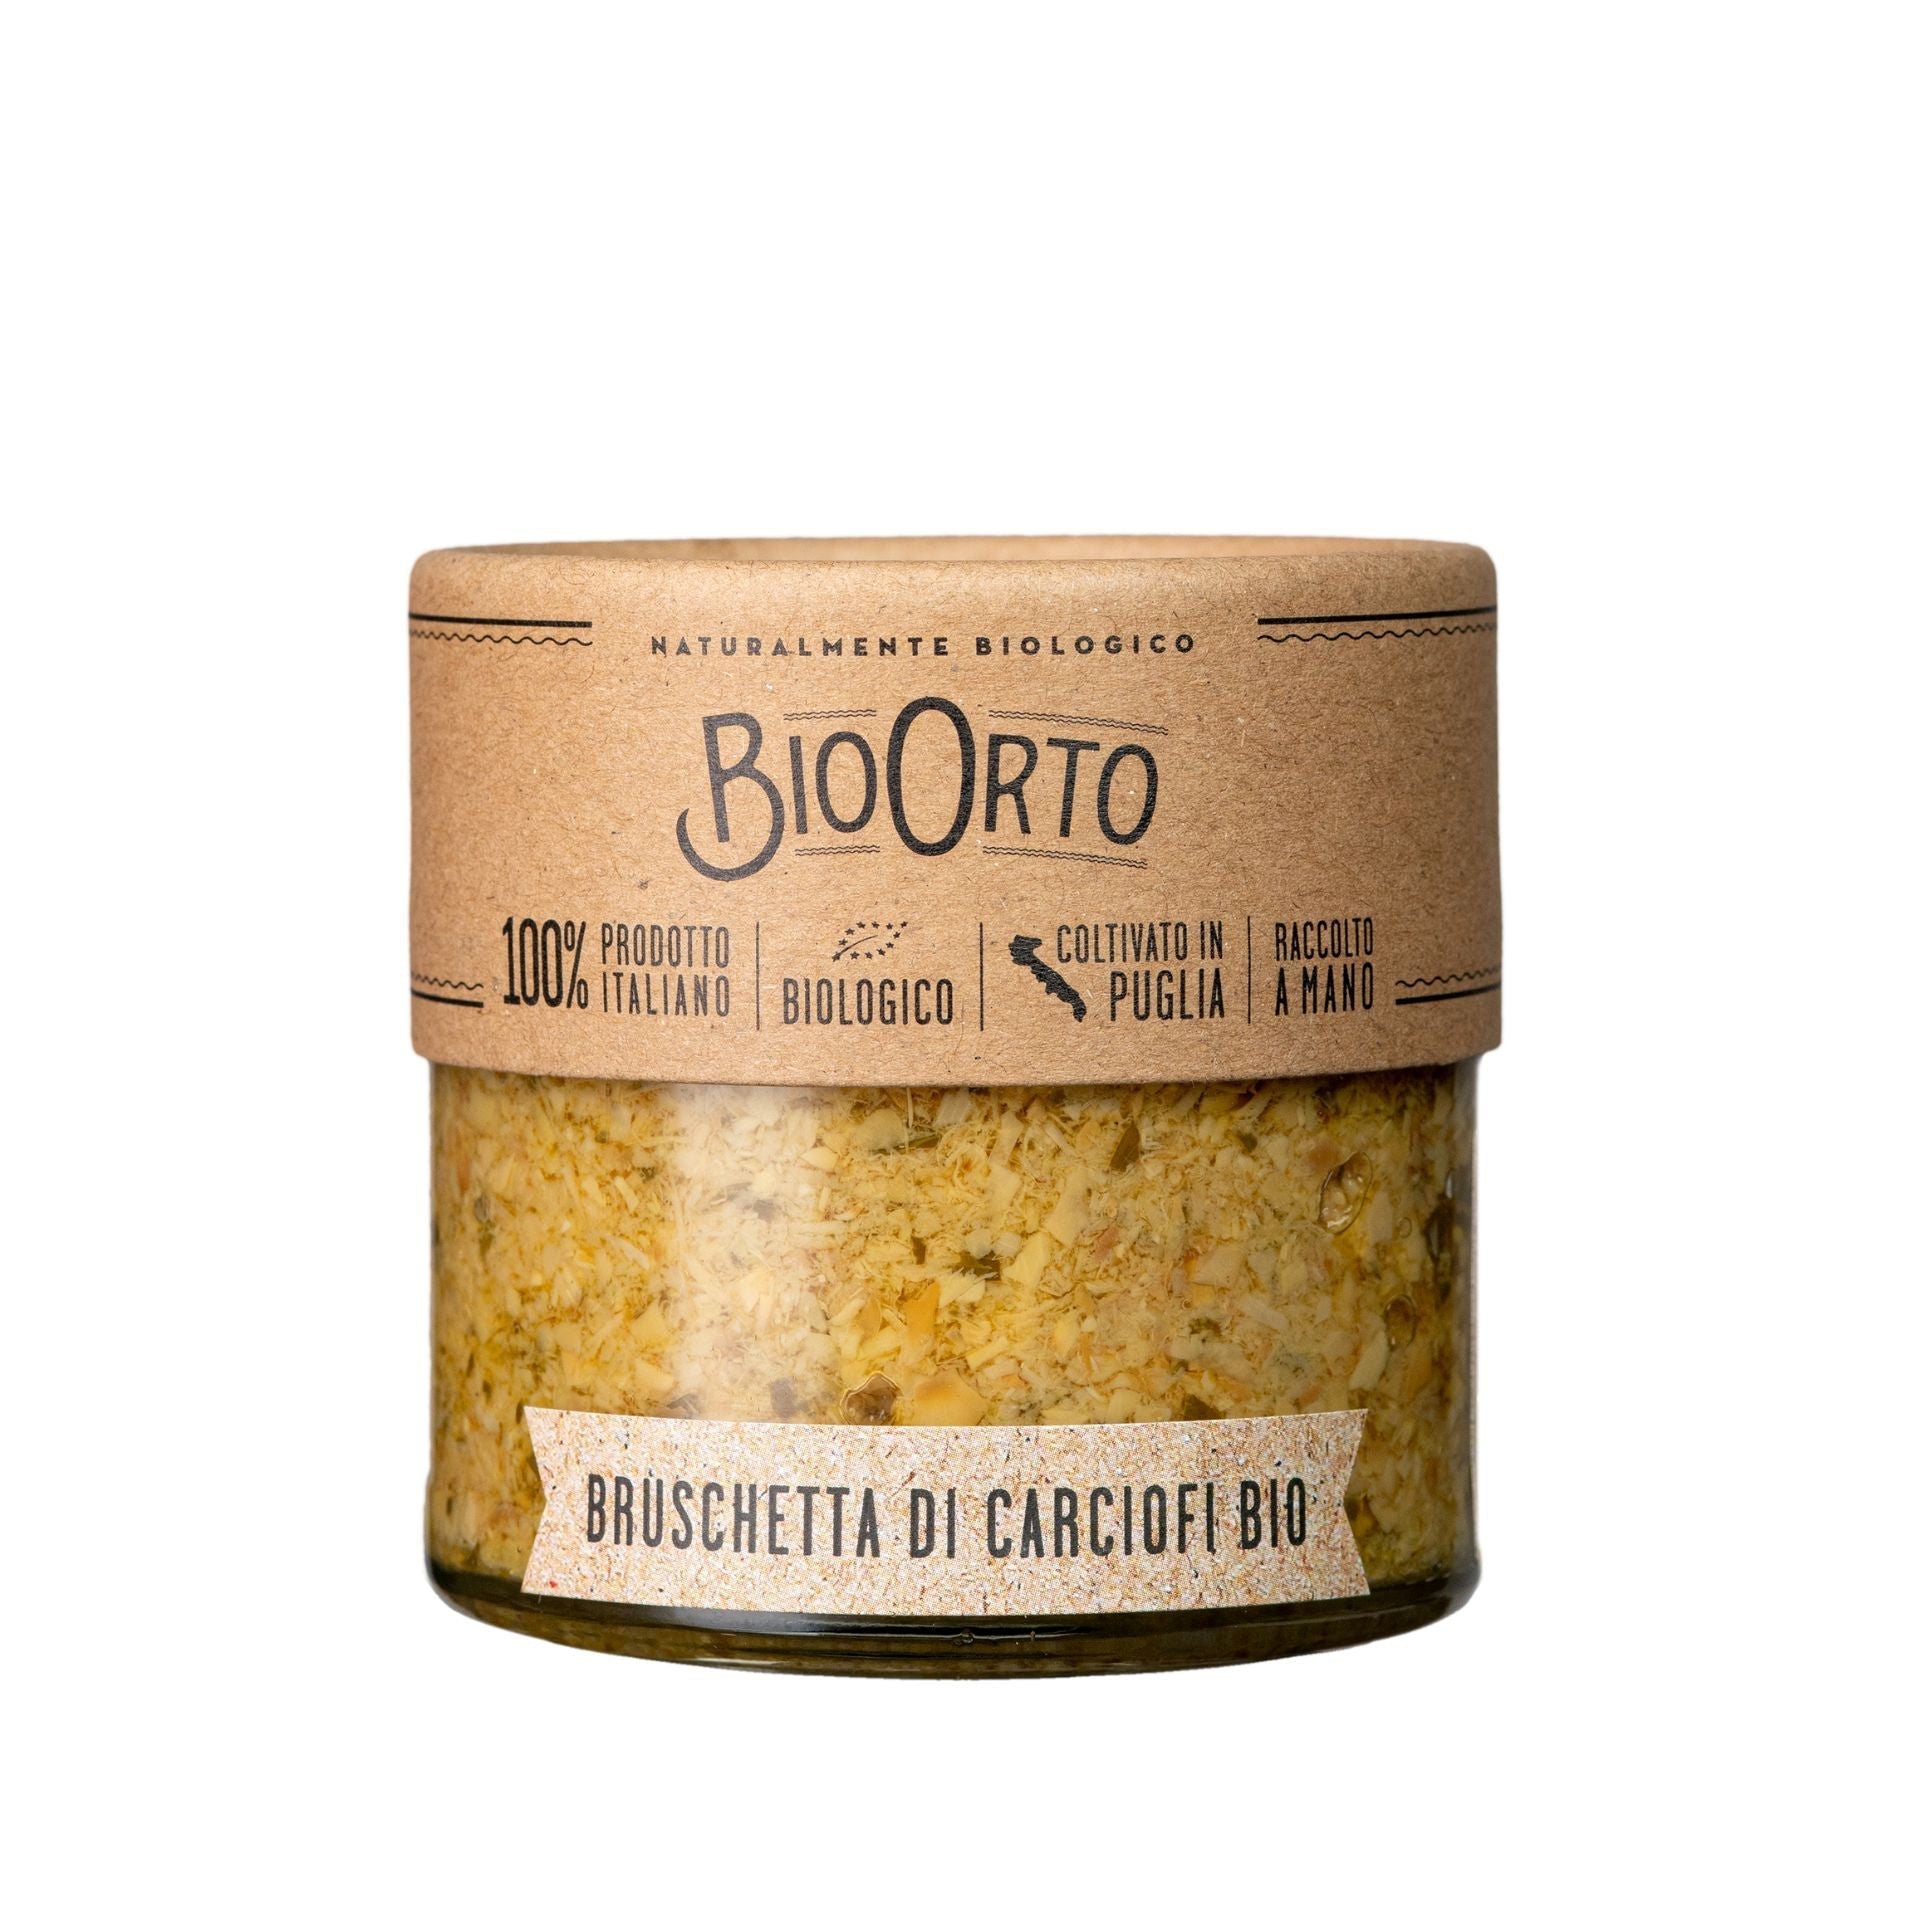 Bio Orto Organic Artichoke Bruschetta Spread 212ml  | Imported and distributed in the UK by Just Gourmet Foods